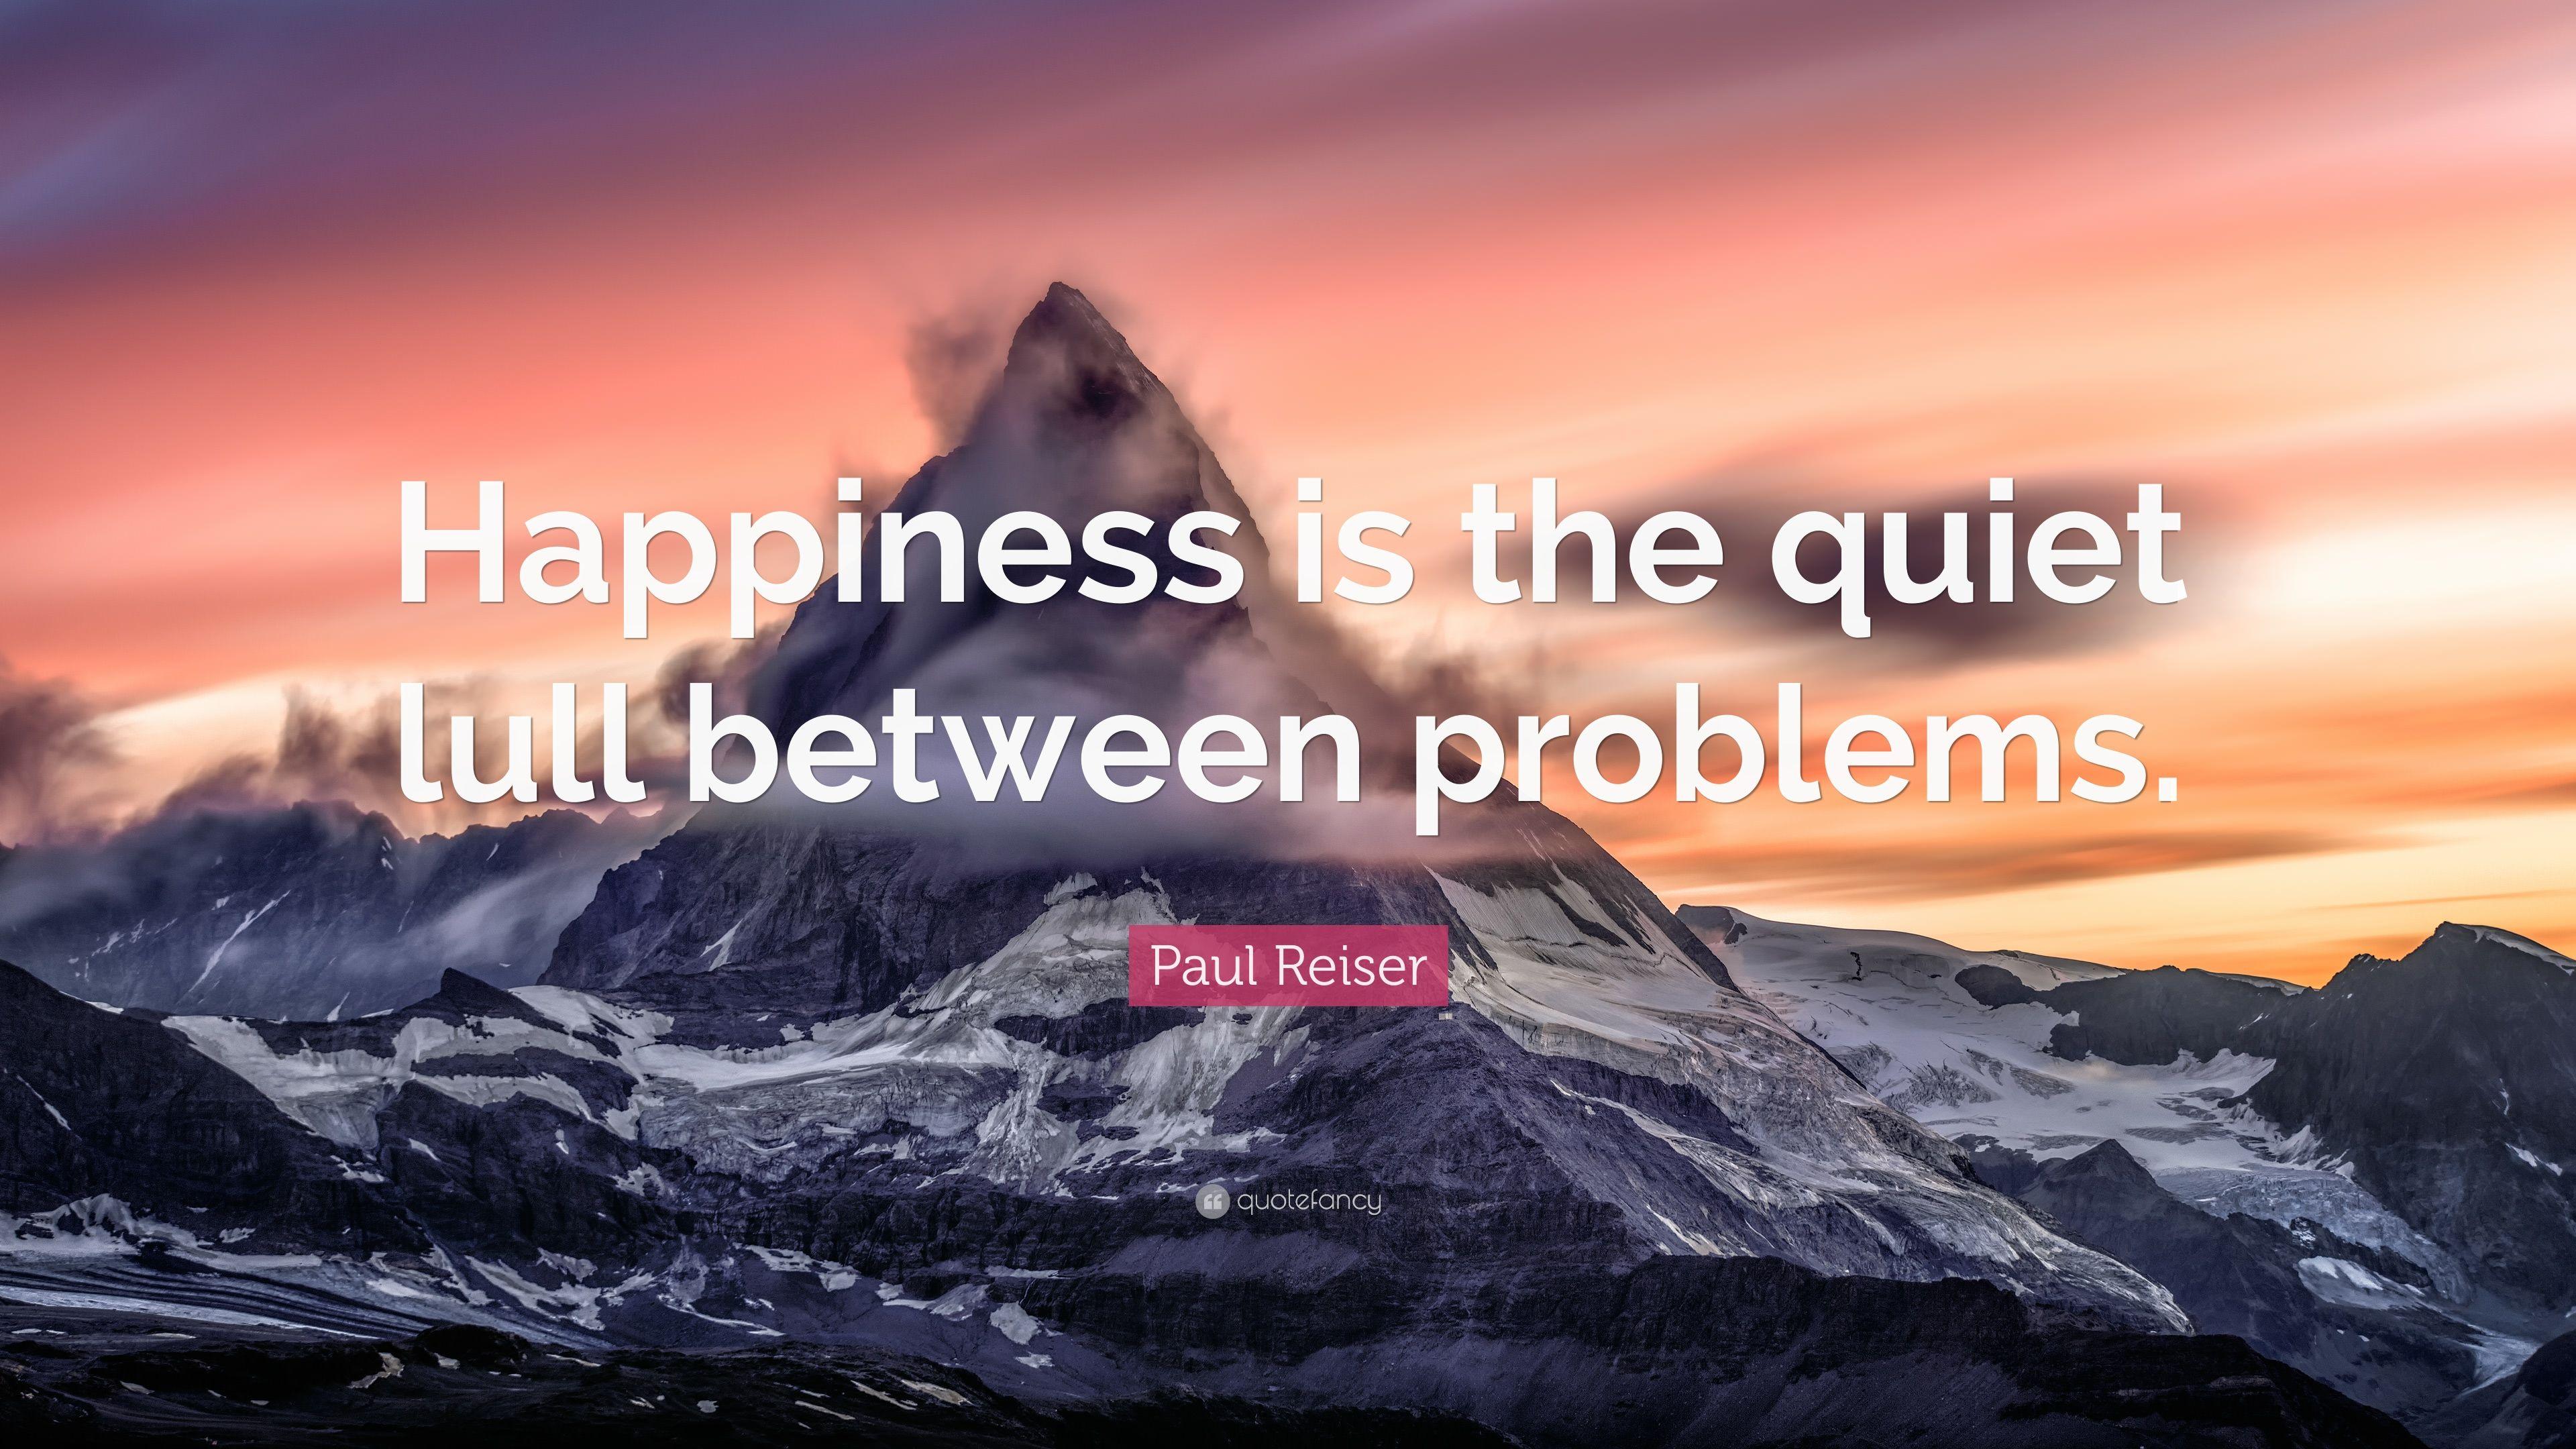 Paul Reiser Quote: “Happiness is the quiet lull between problems